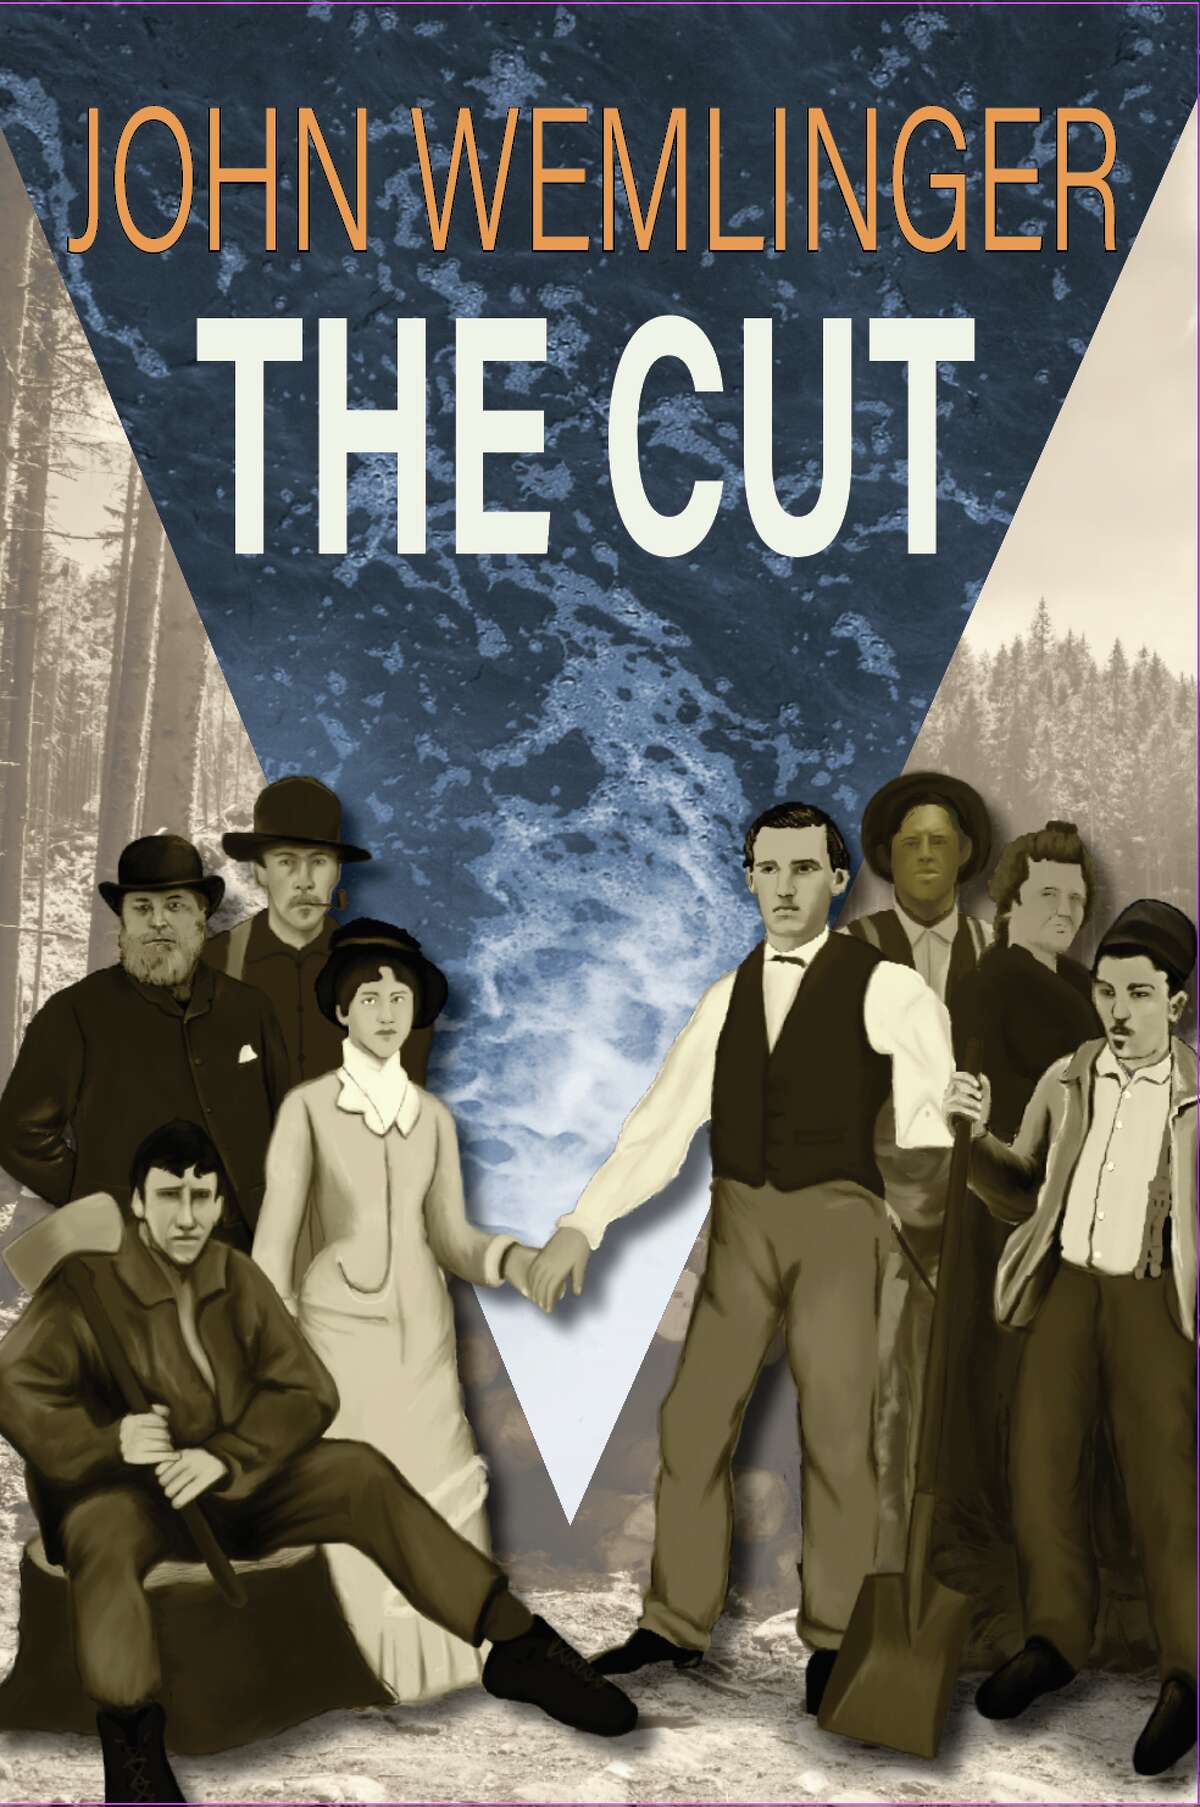 Onekama author John Wemlinger wrote “The Cut,” a historical fiction novel, based on events that took place in Onekama in 1871. (Courtesy art)